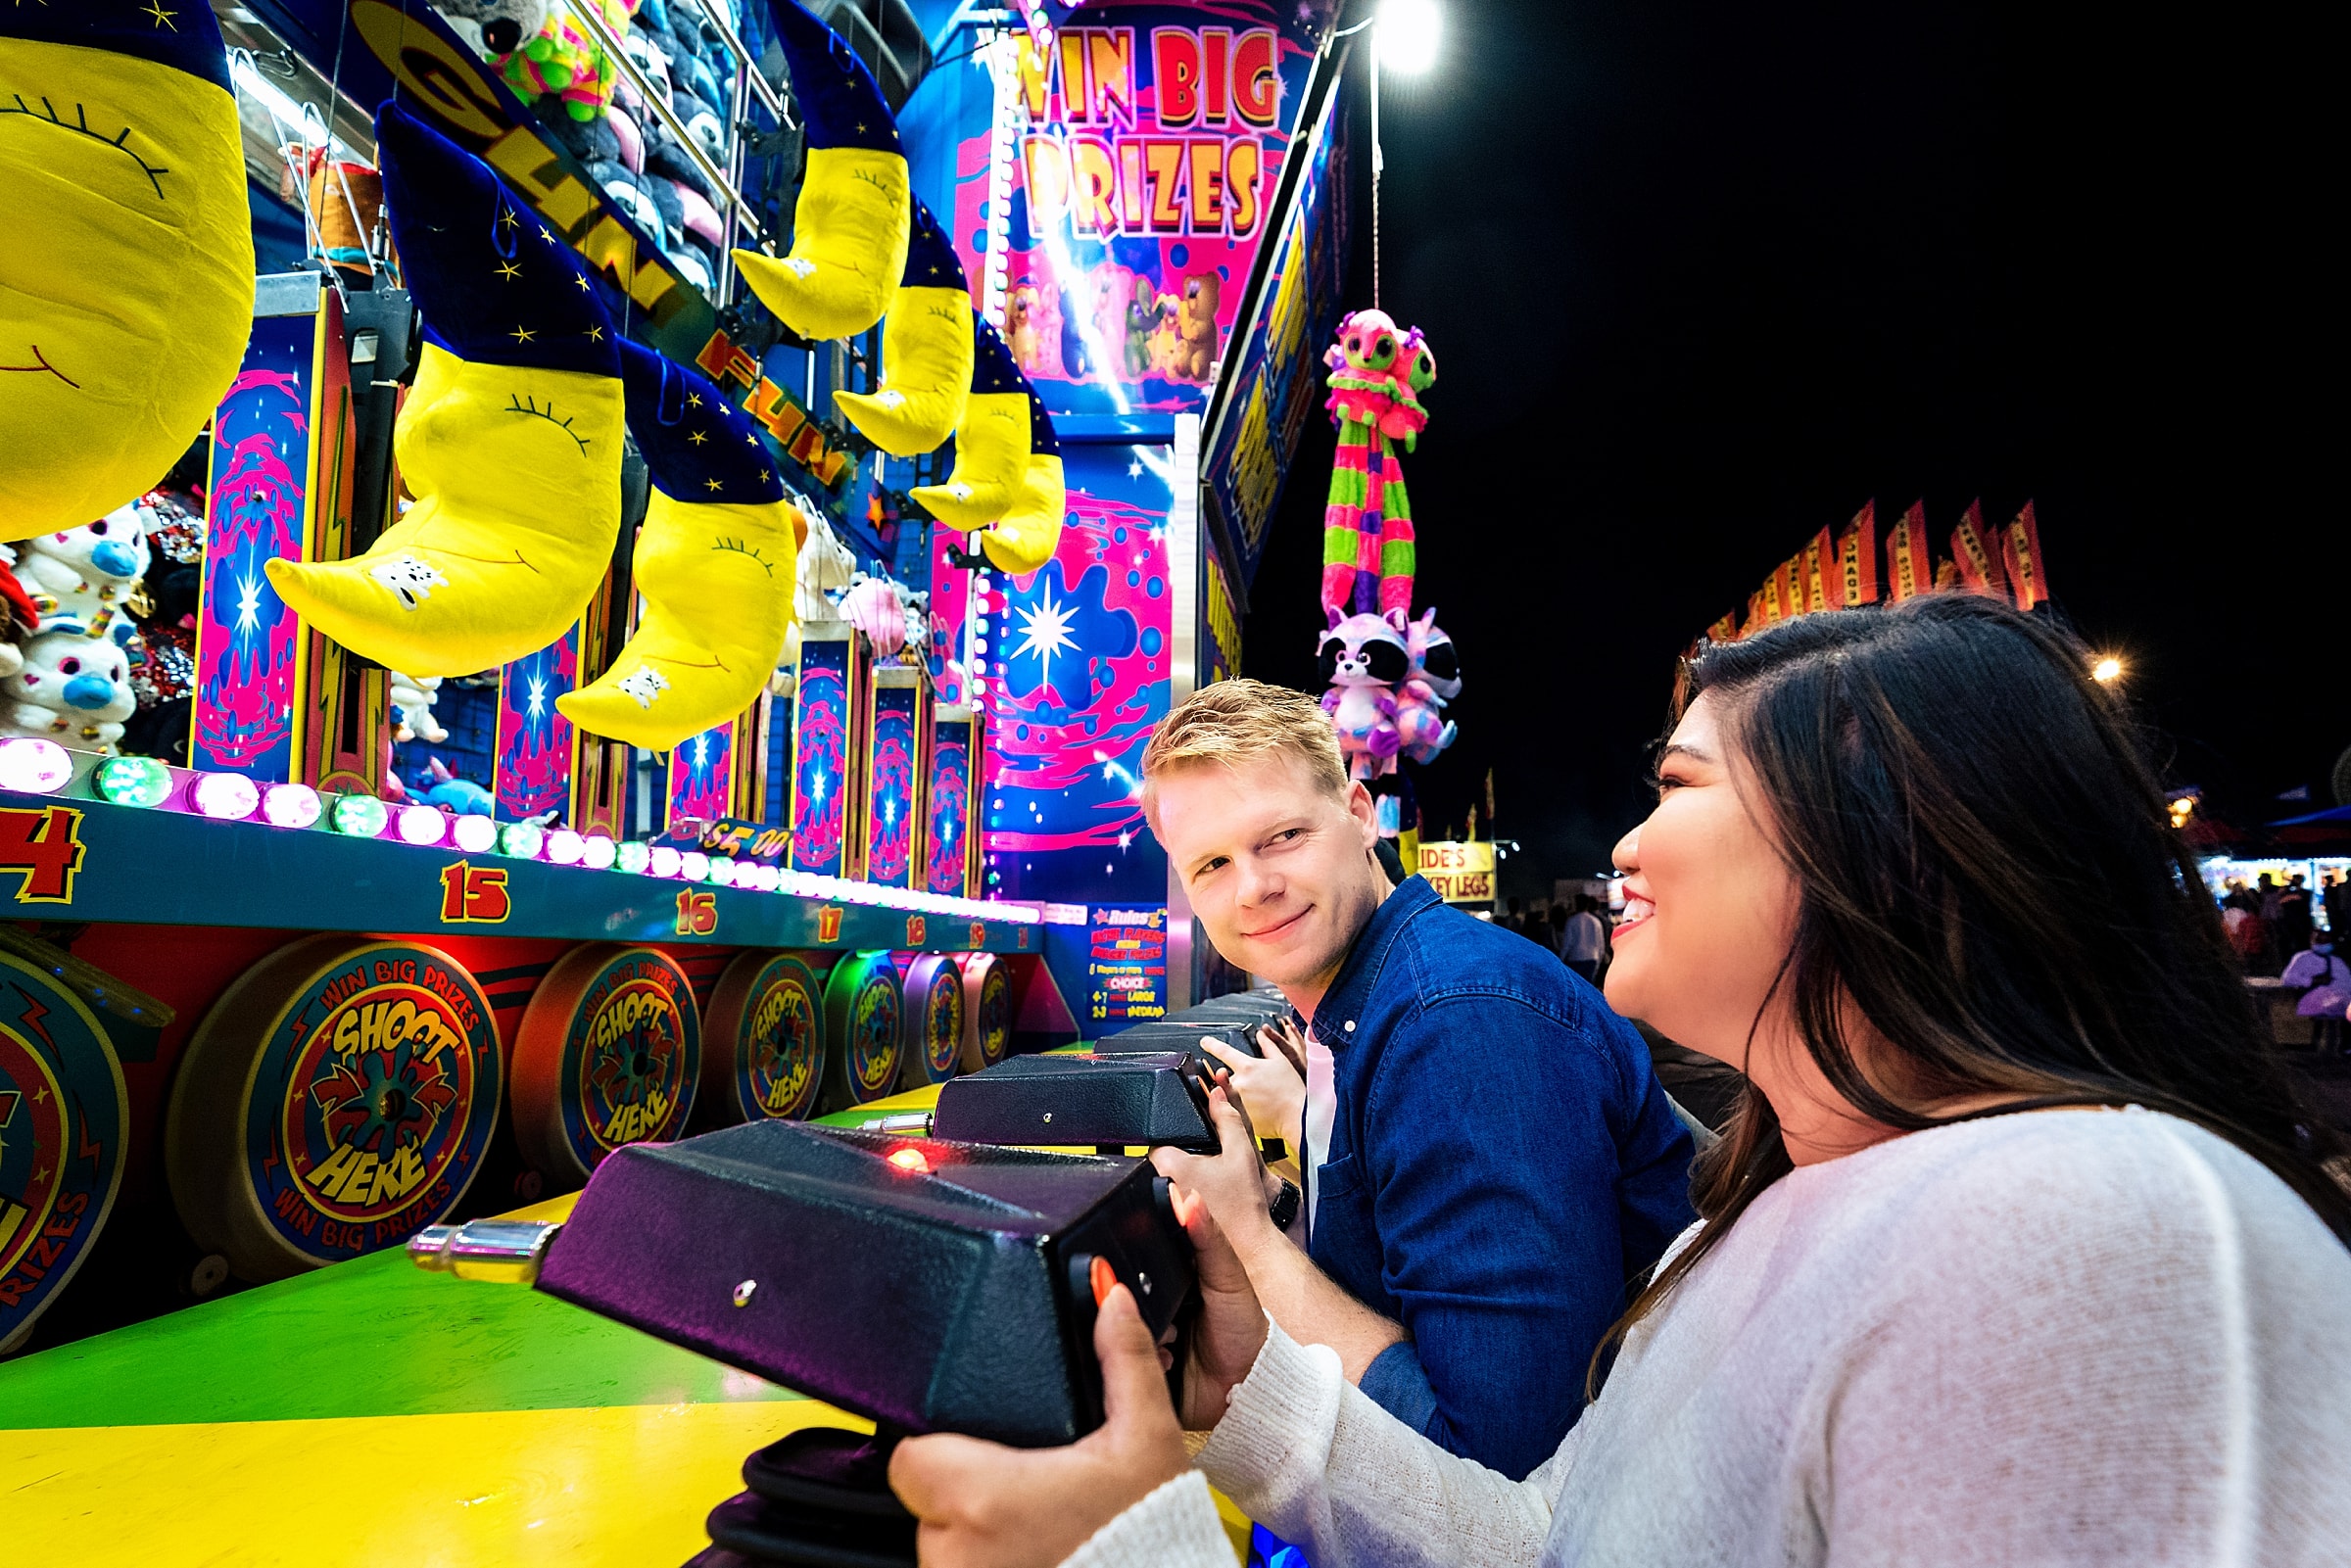 if you do an NC State Fair engagement session, make sure you do some games!